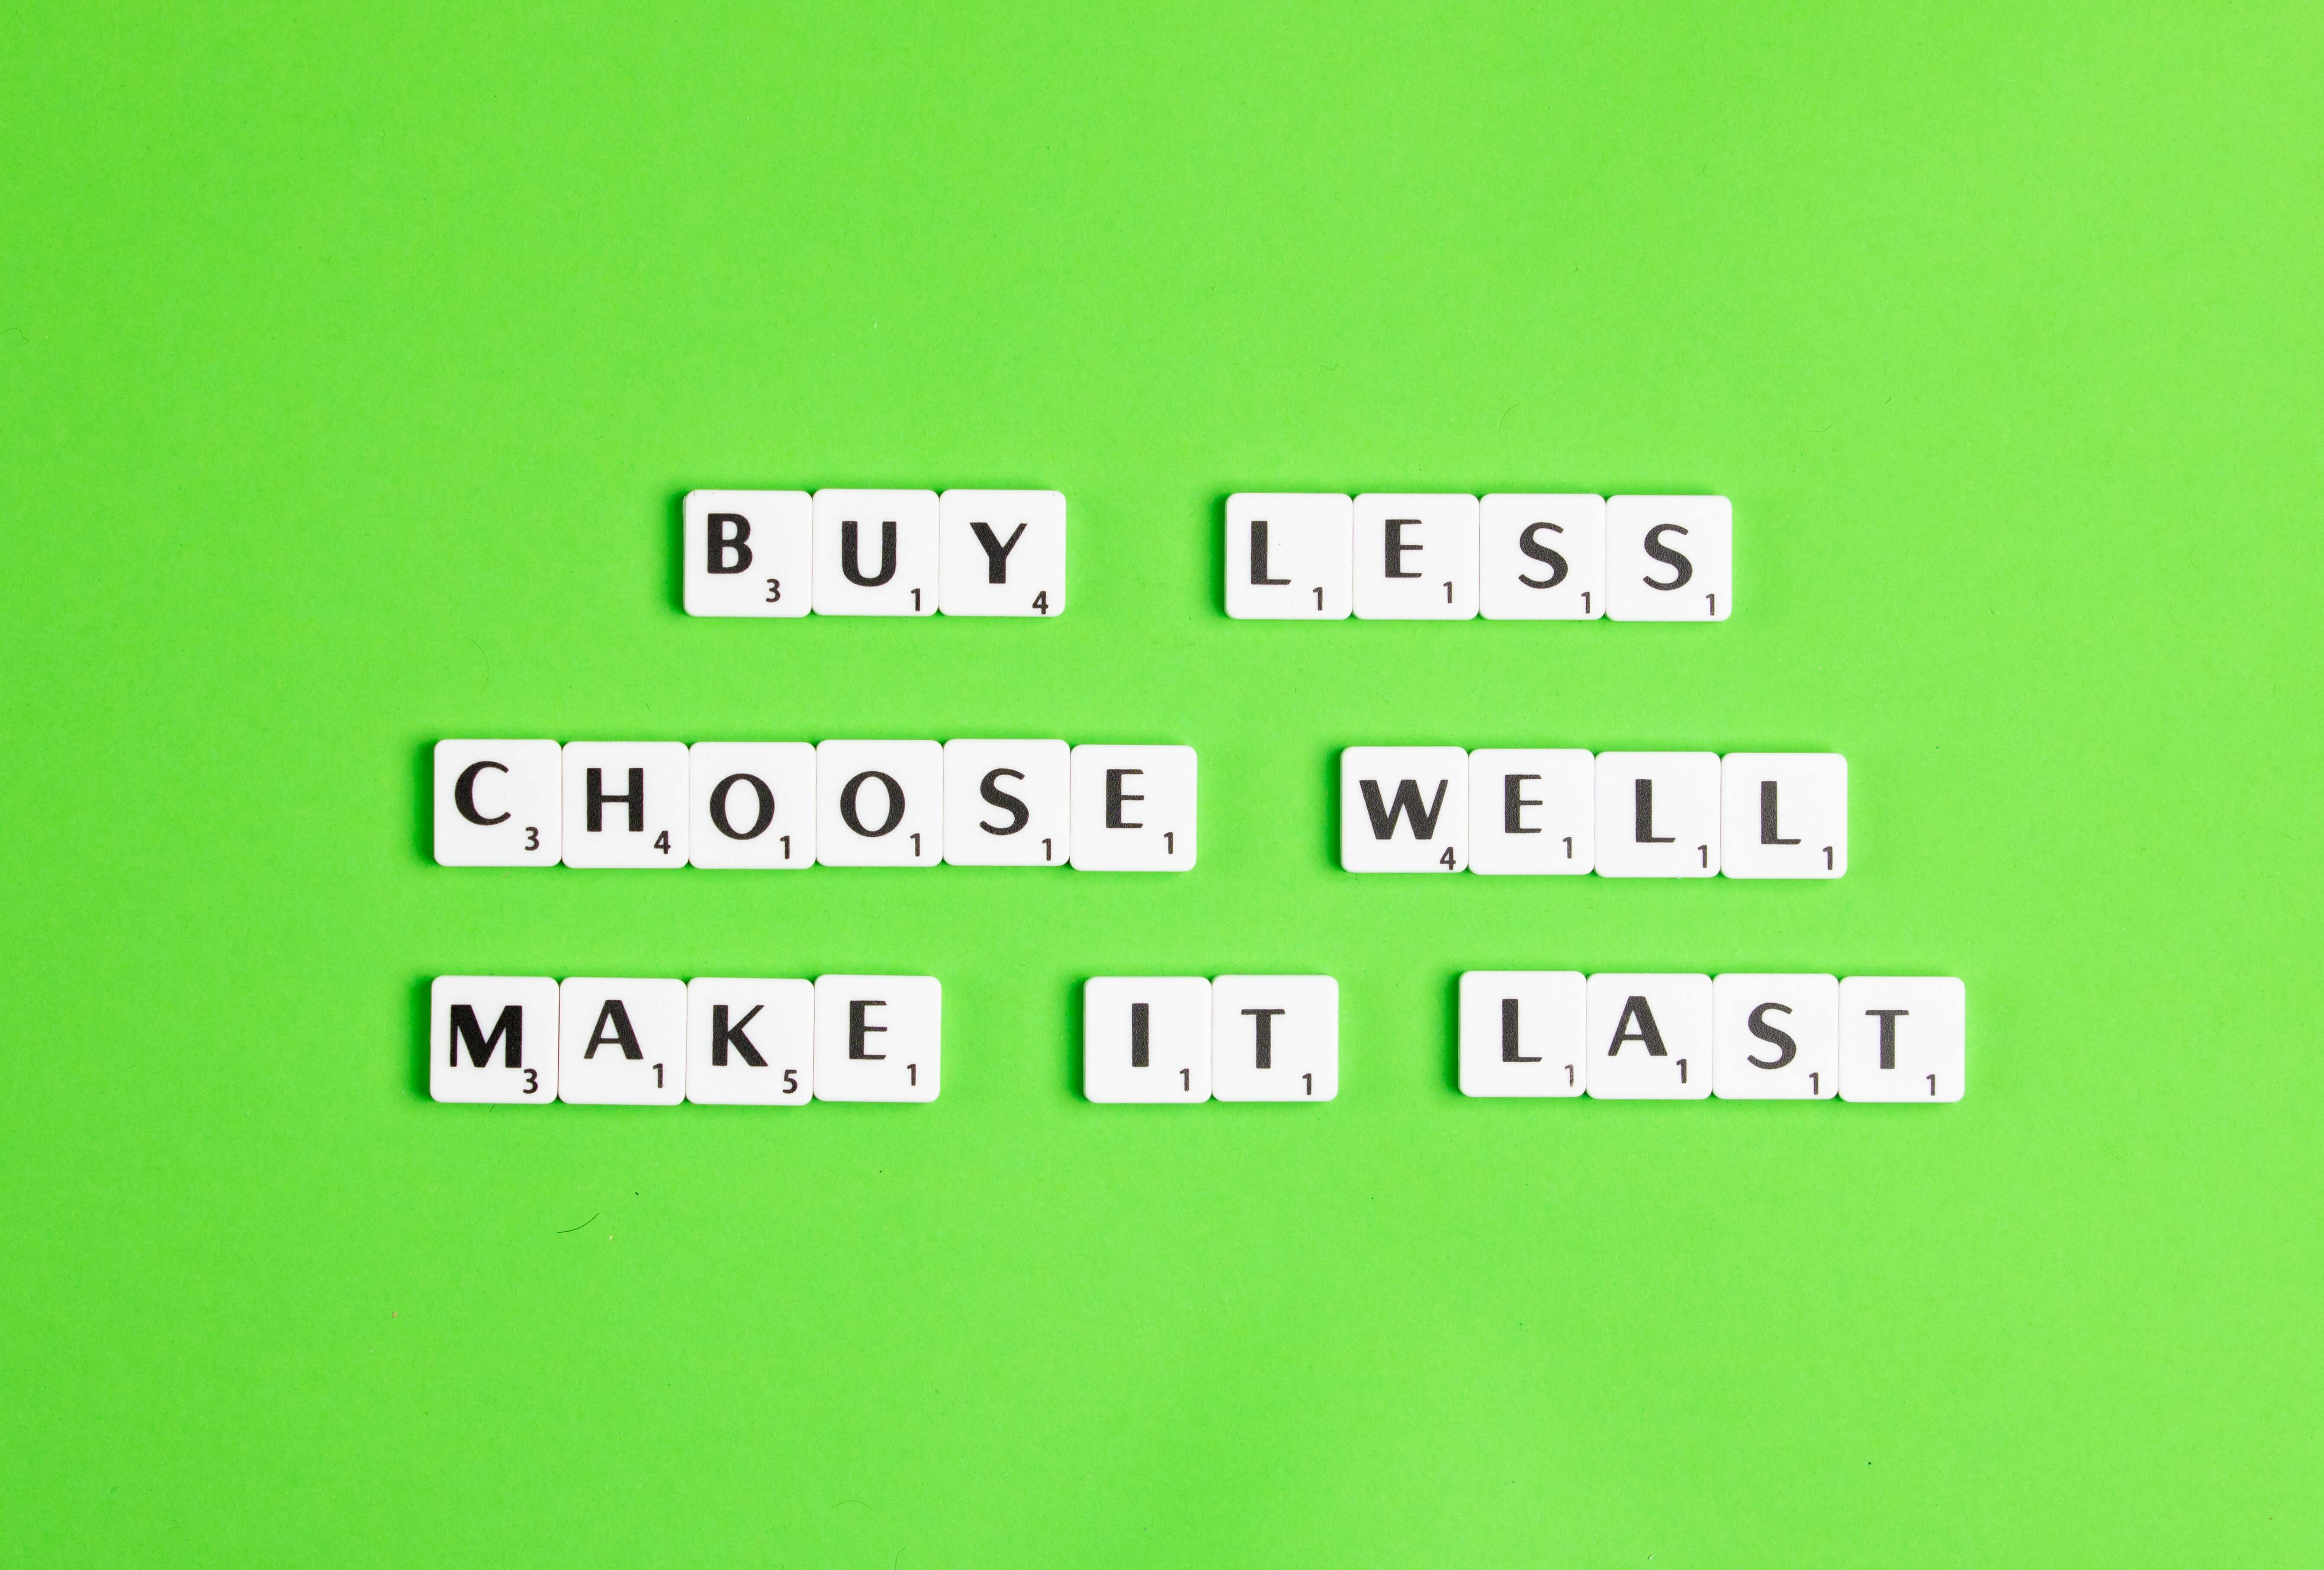 Buy Less, Choose well, make it last made up scrabble letters